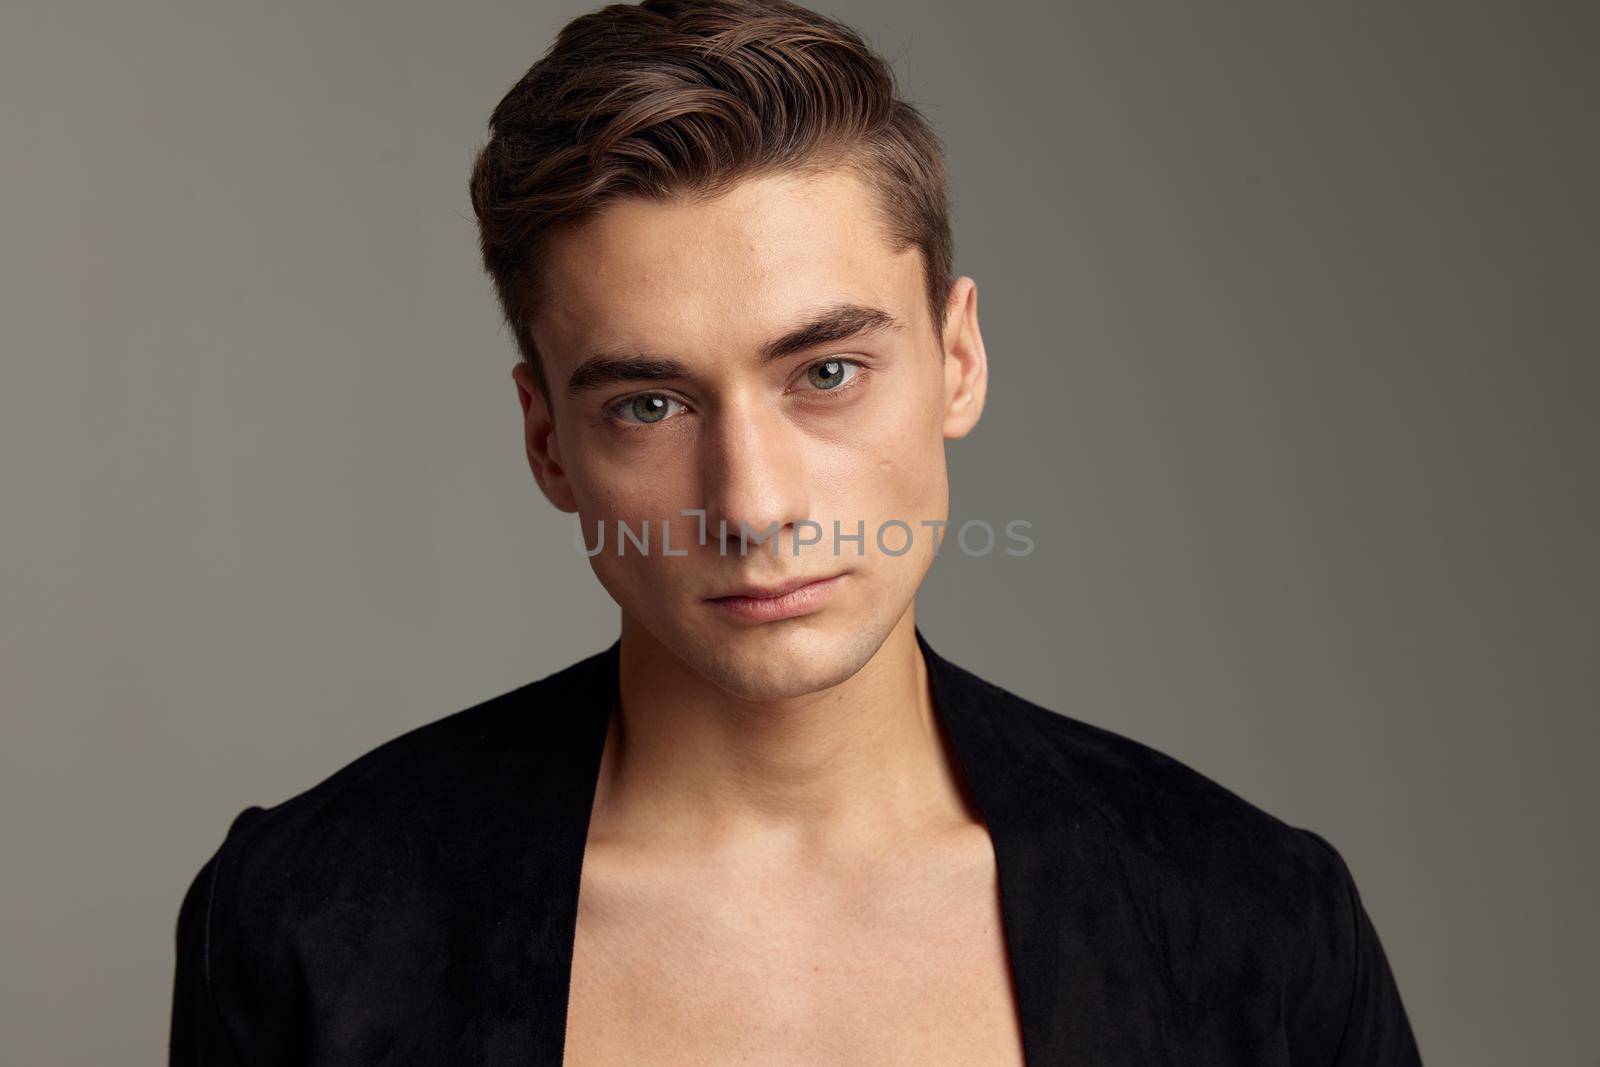 Handsome man fashionable hairstyle black jacket close-up. High quality photo